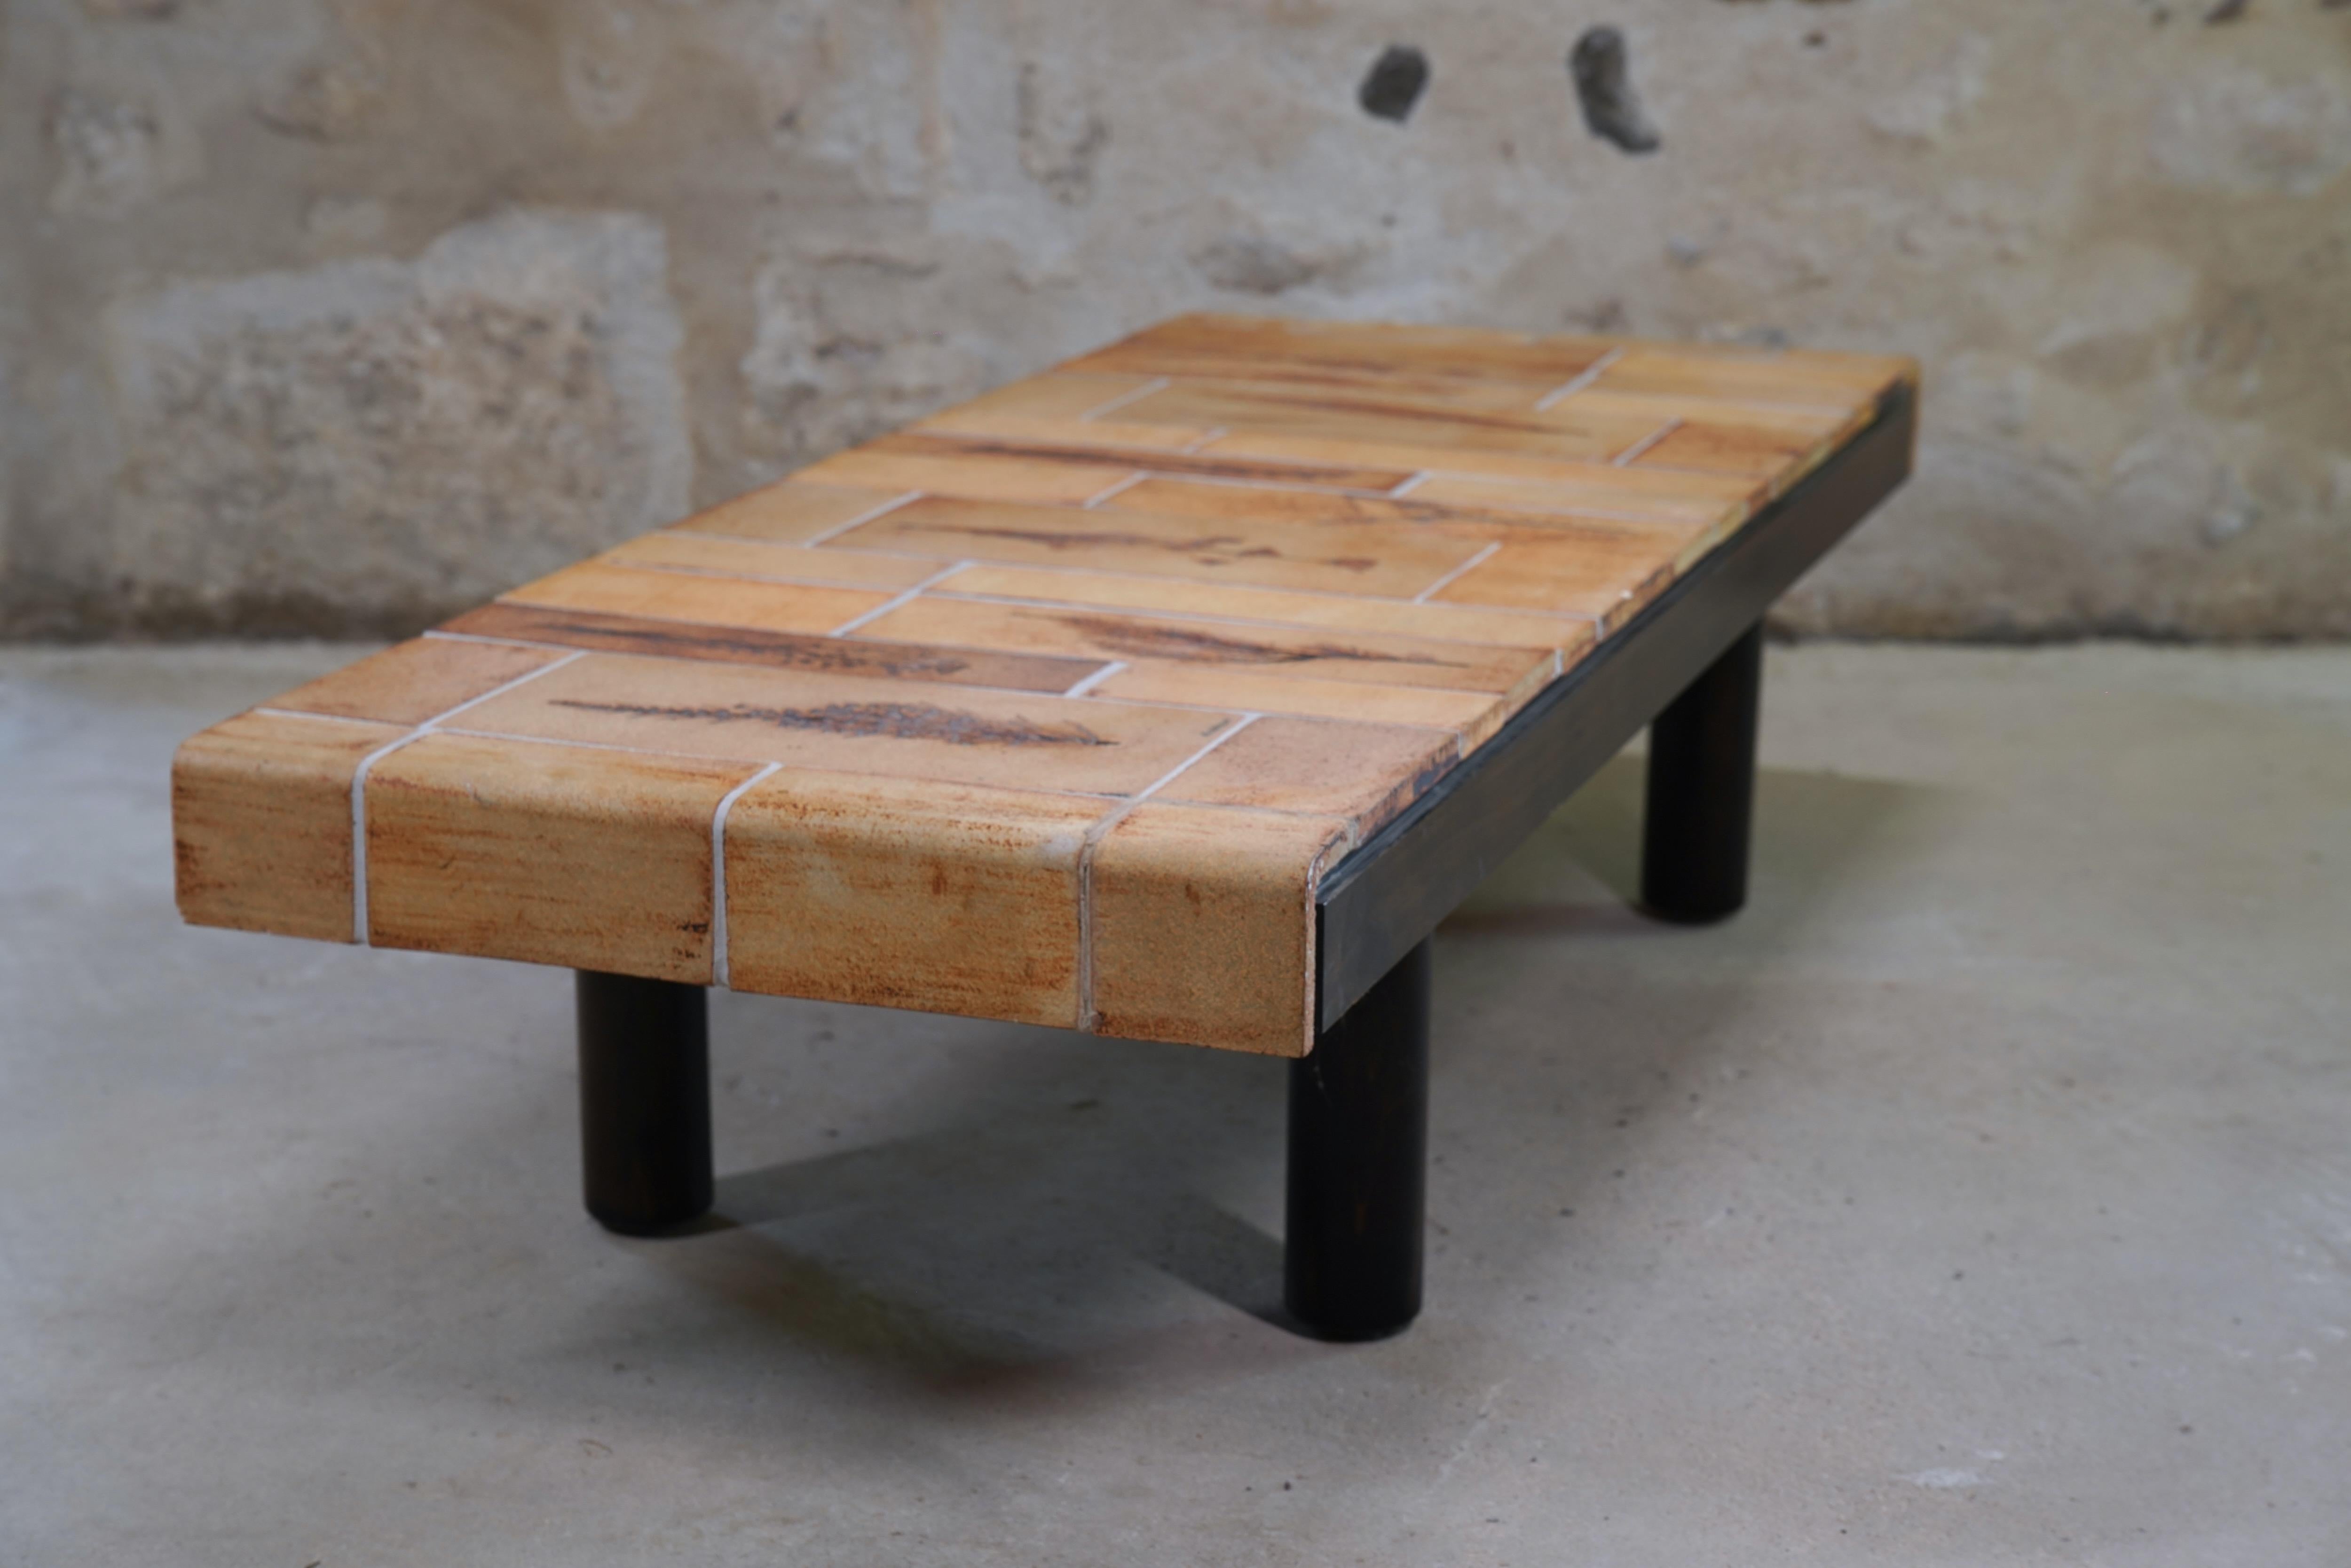 French Roger Capron Coffee Table with Garrigue Tiles, France 1970s For Sale